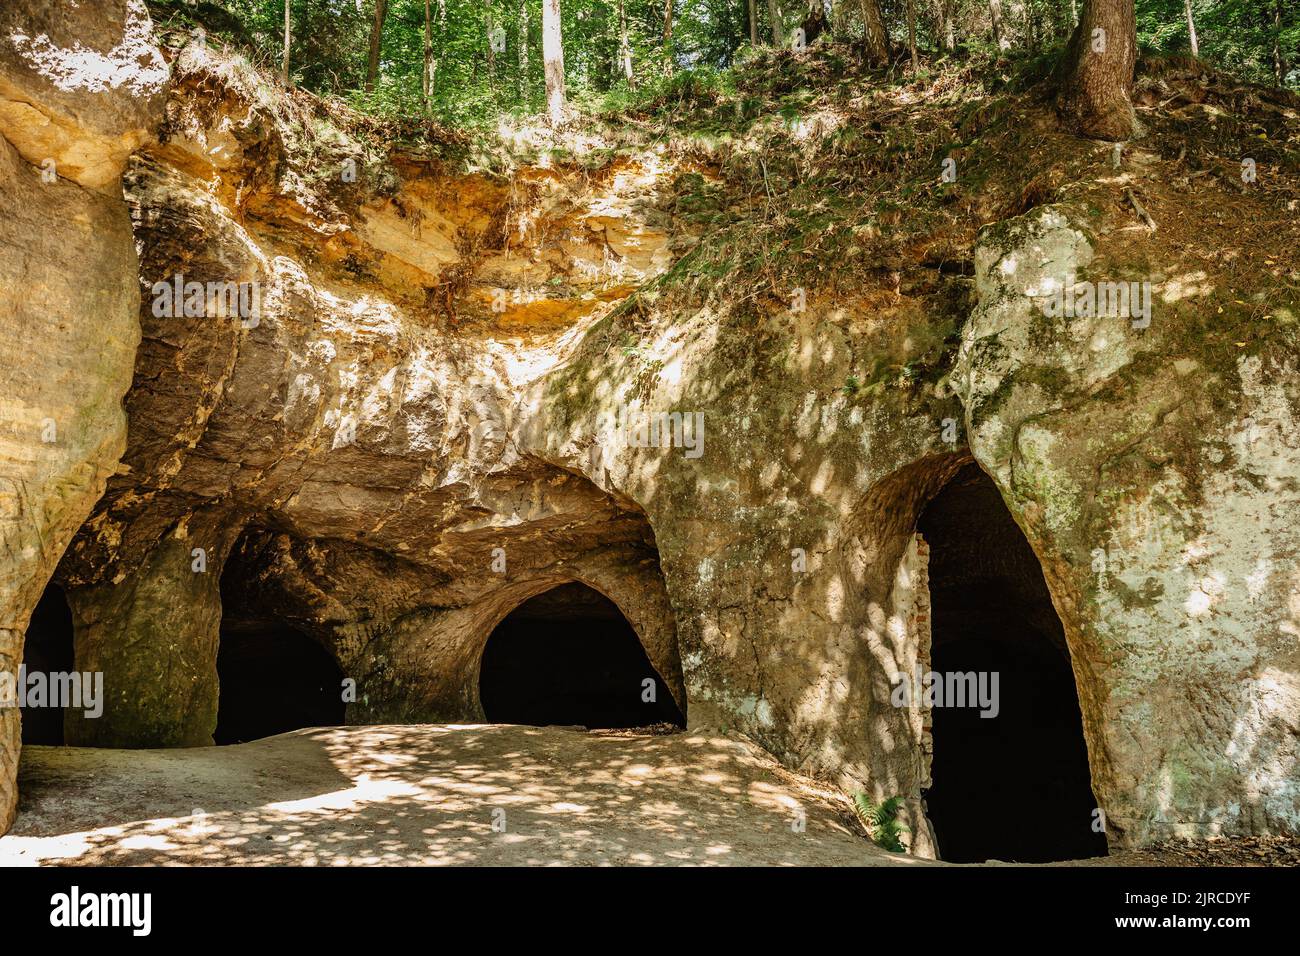 System of caves in sandstone rocks called Puste kostely, Czech republic.Entrance to large underground quarry.Popular tourist attraction.Czech nature. Stock Photo